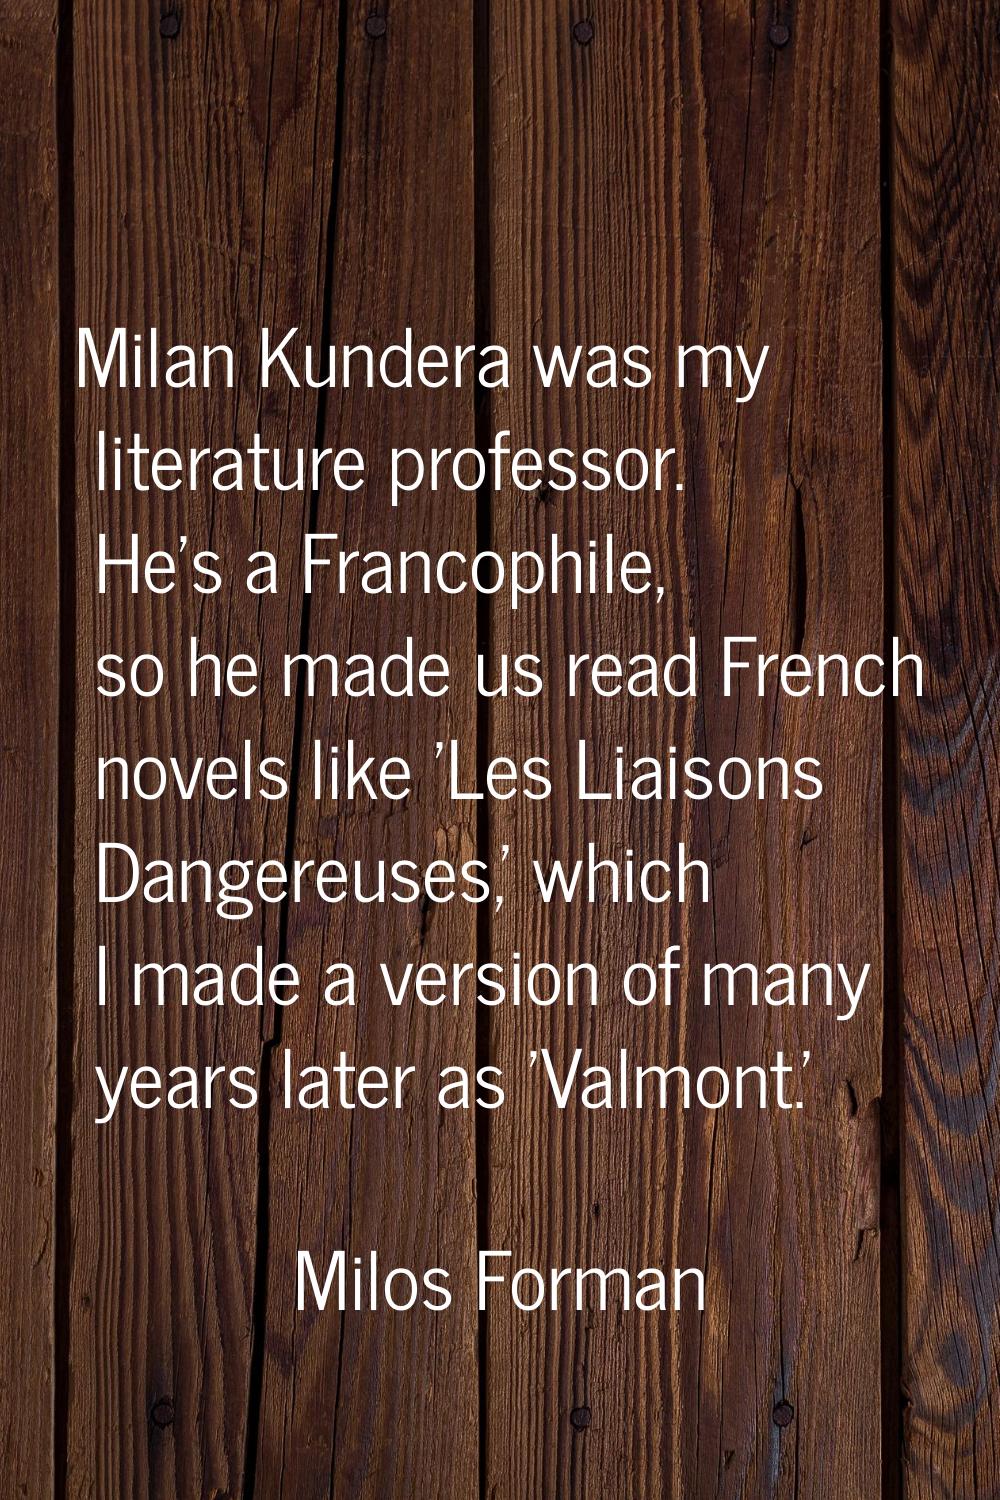 Milan Kundera was my literature professor. He's a Francophile, so he made us read French novels lik